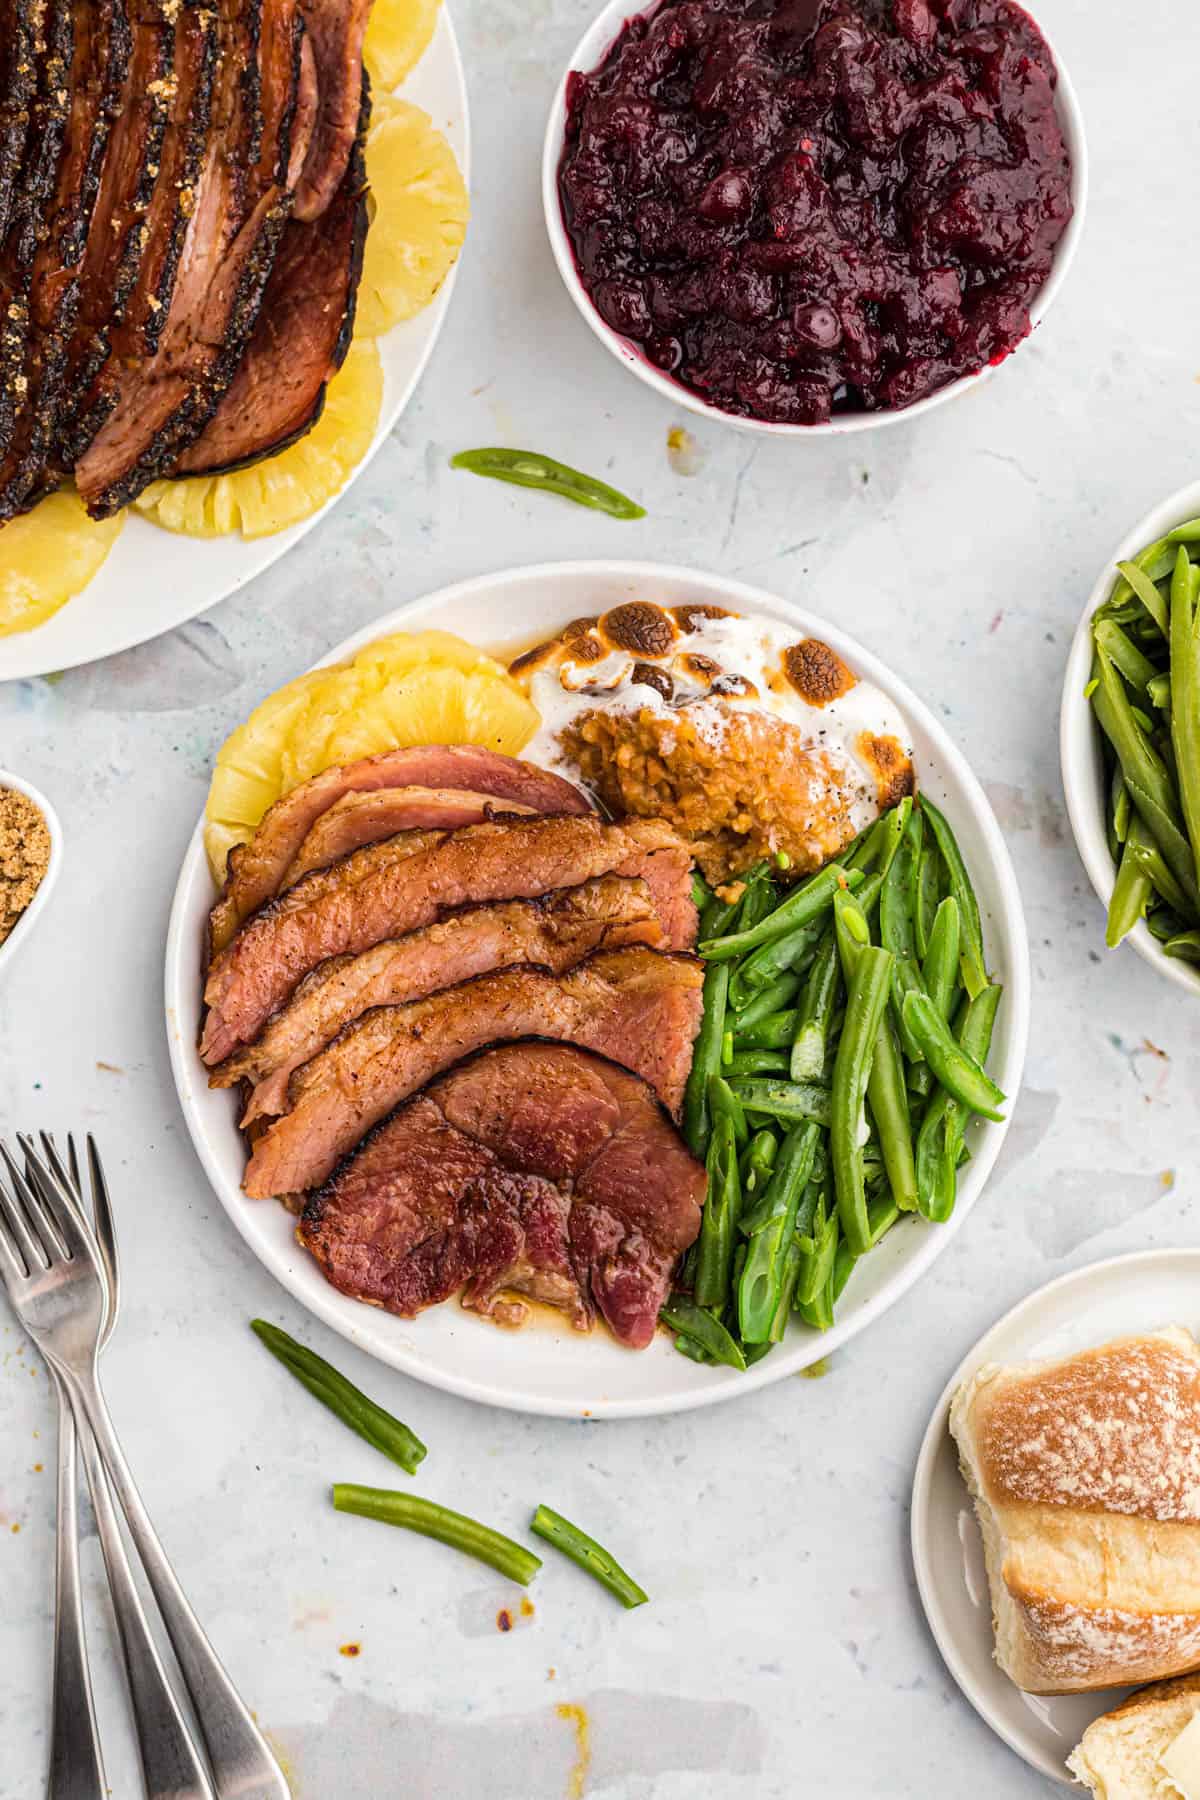 maple glazed ham served on a plate with green beans and sweet potato casserole